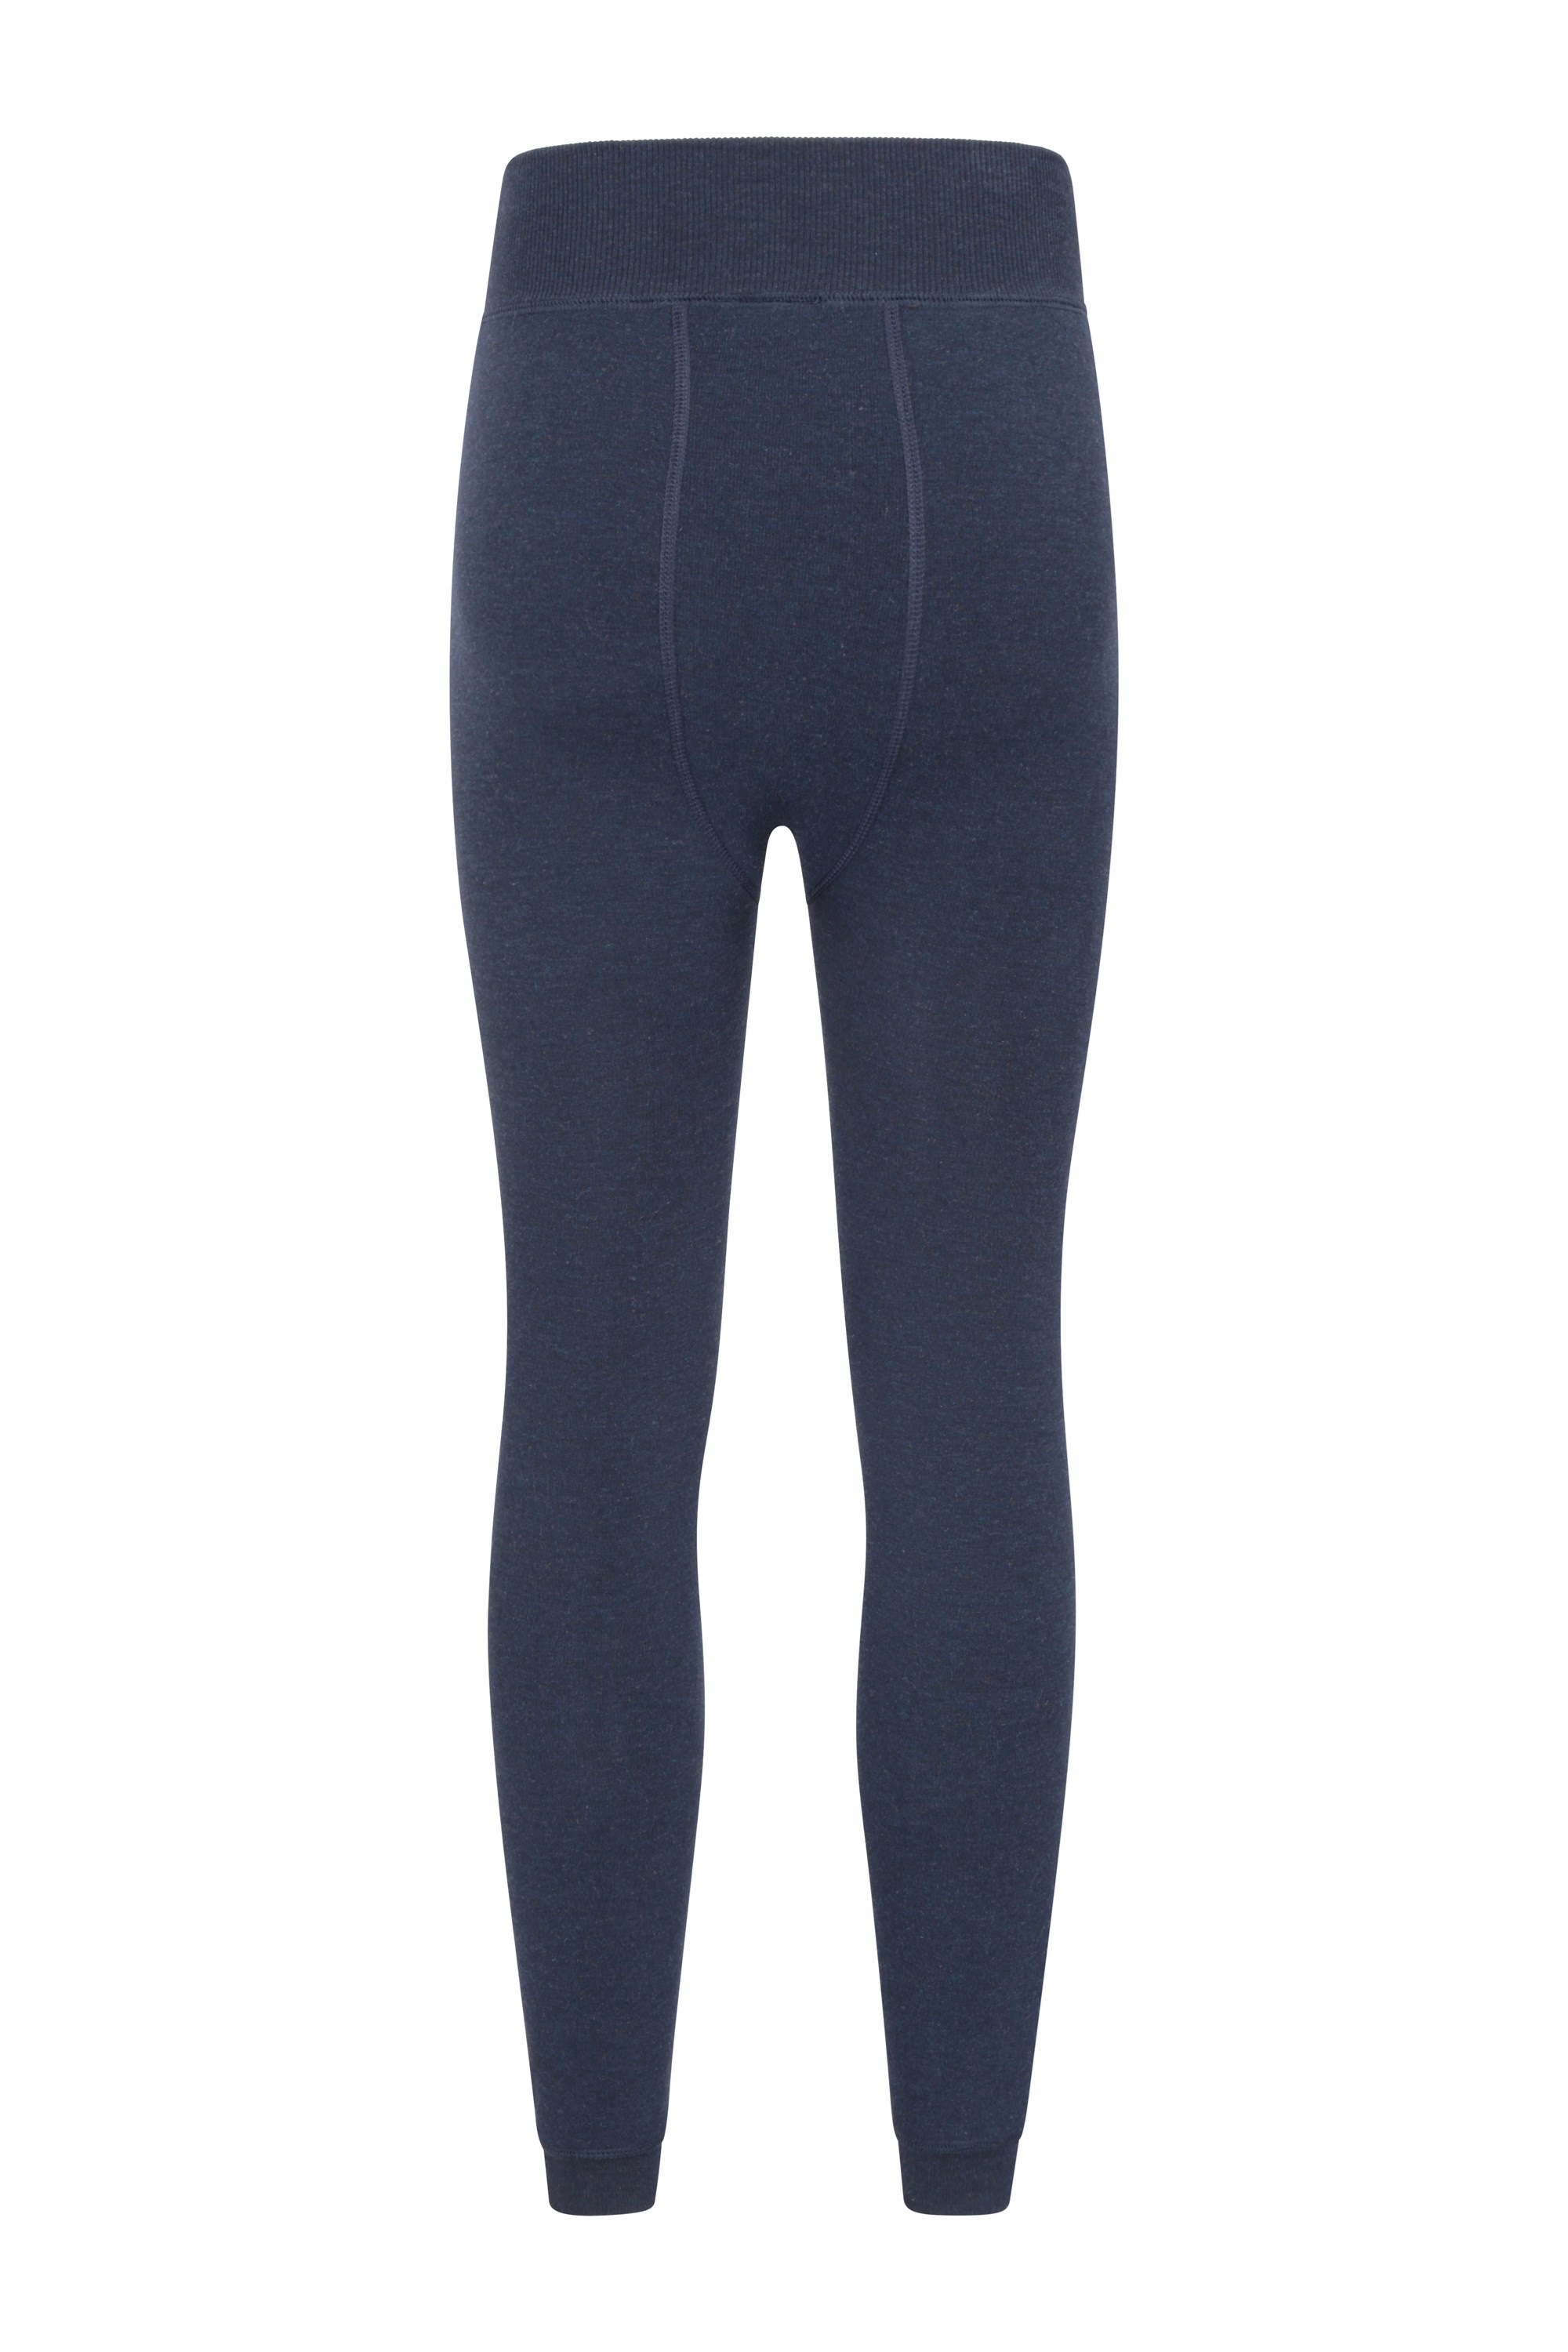 Black Fleece Lined Thermal Leggings - British made by Ruby Fury